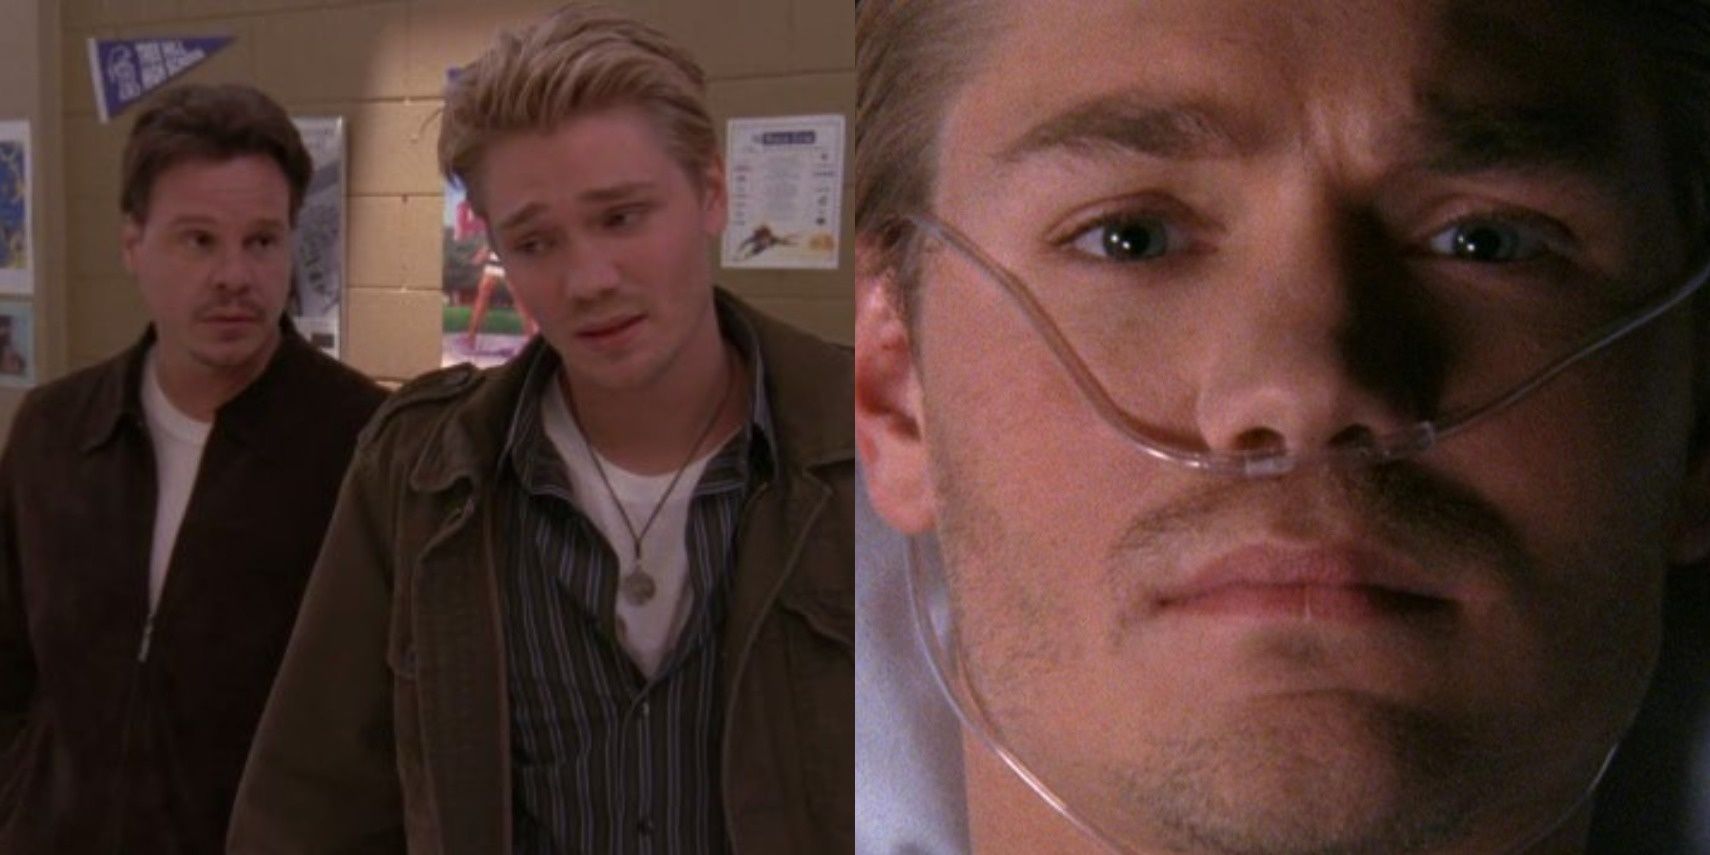 Lucas (Chad Michael Murray) and Keith (Craig Sheffer) talking; Lucas opening his eyes in &quot;One Tree Hill.&quot;